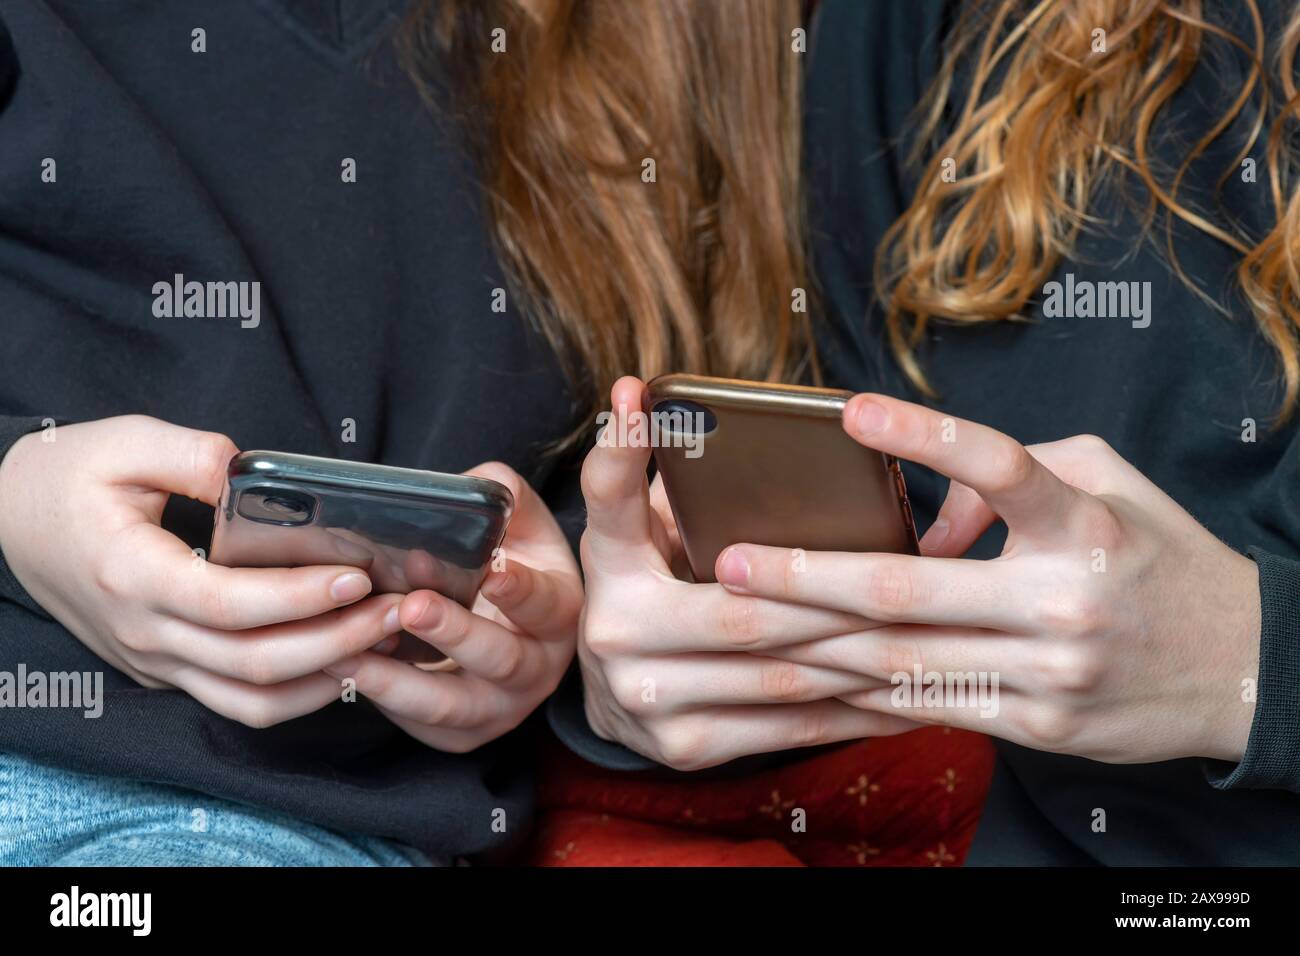 teenage girls being cyber bullies  or just catching up on social media both on there phones, hand level  copy space above Stock Photo